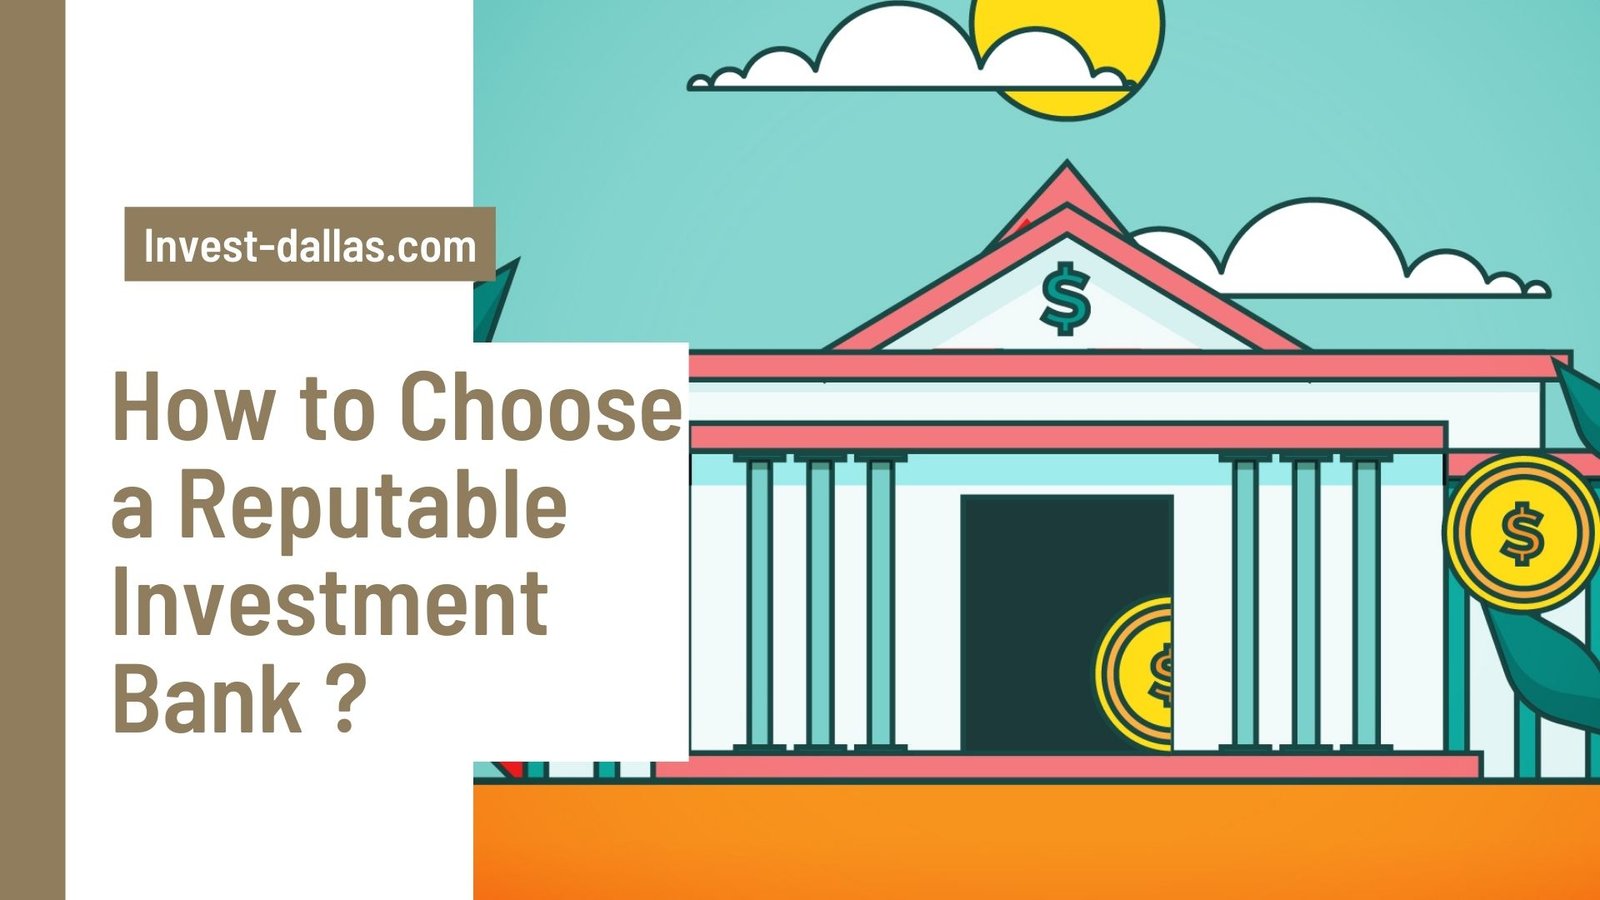 Investment Banks: What They Are and How to Choose a Reputable Investment Bank?